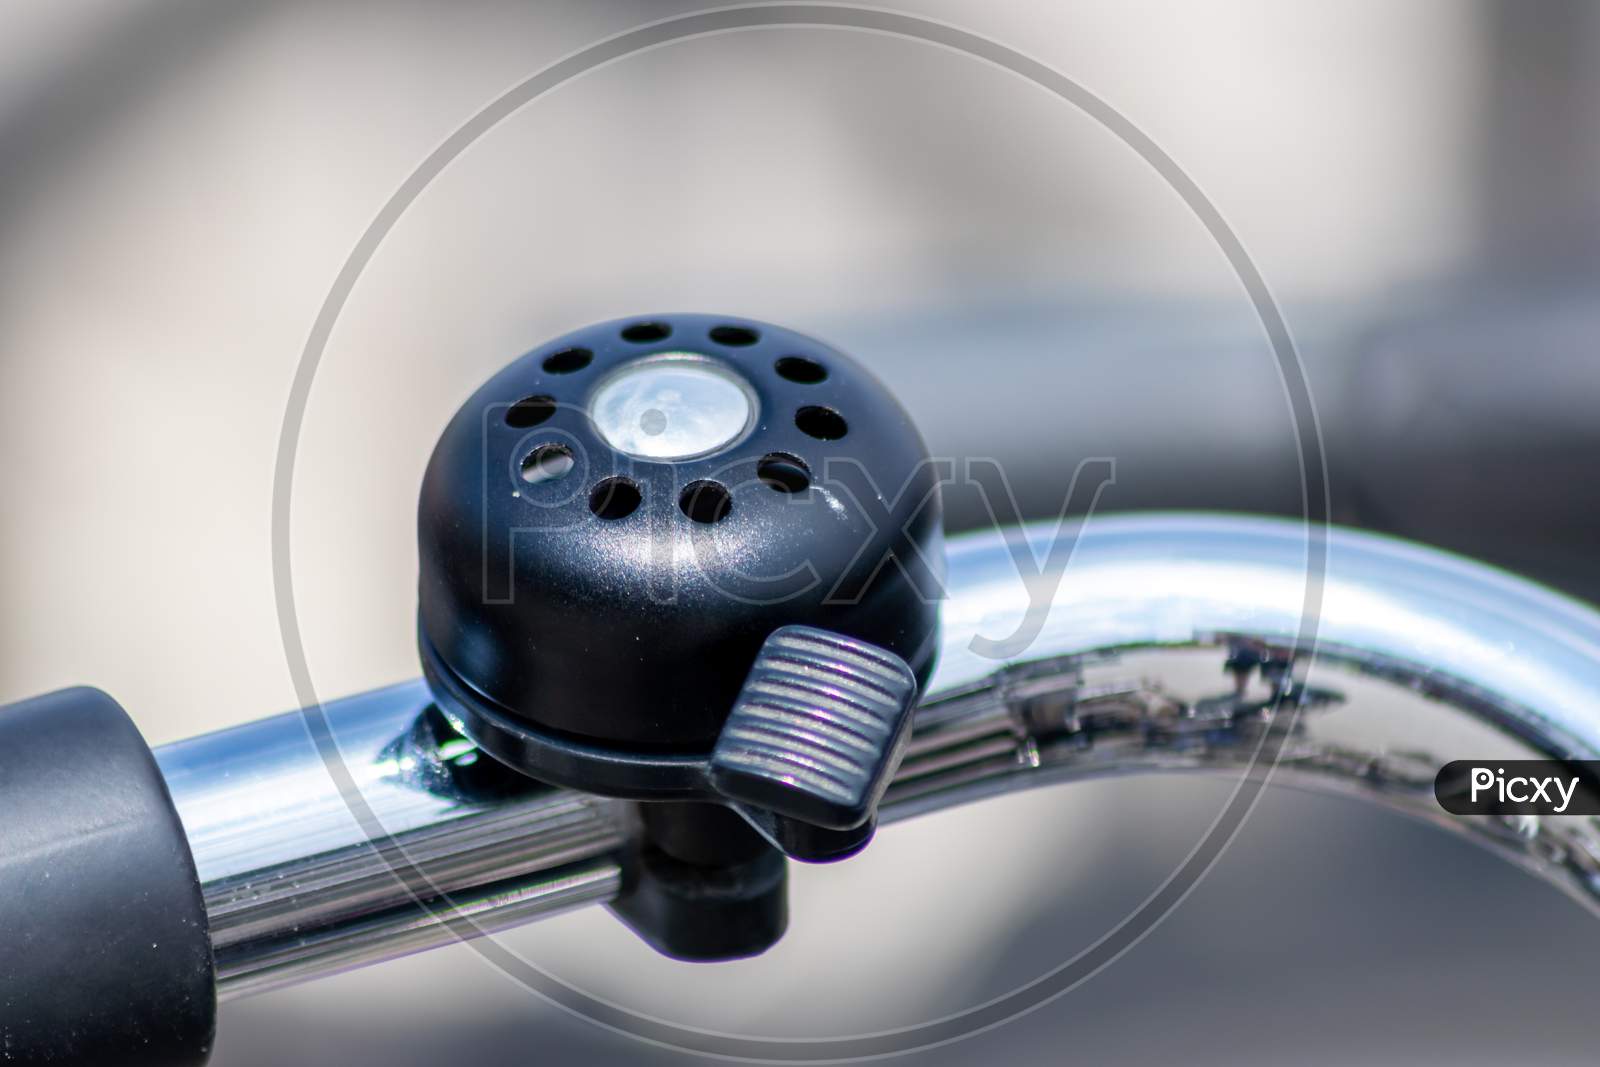 Beautiful bike bell with a shiny finish at a silver metal bicycle handlebar as sustainable mobility and a lot of copy space and a blurred background shows safety aspects and emission free transportation